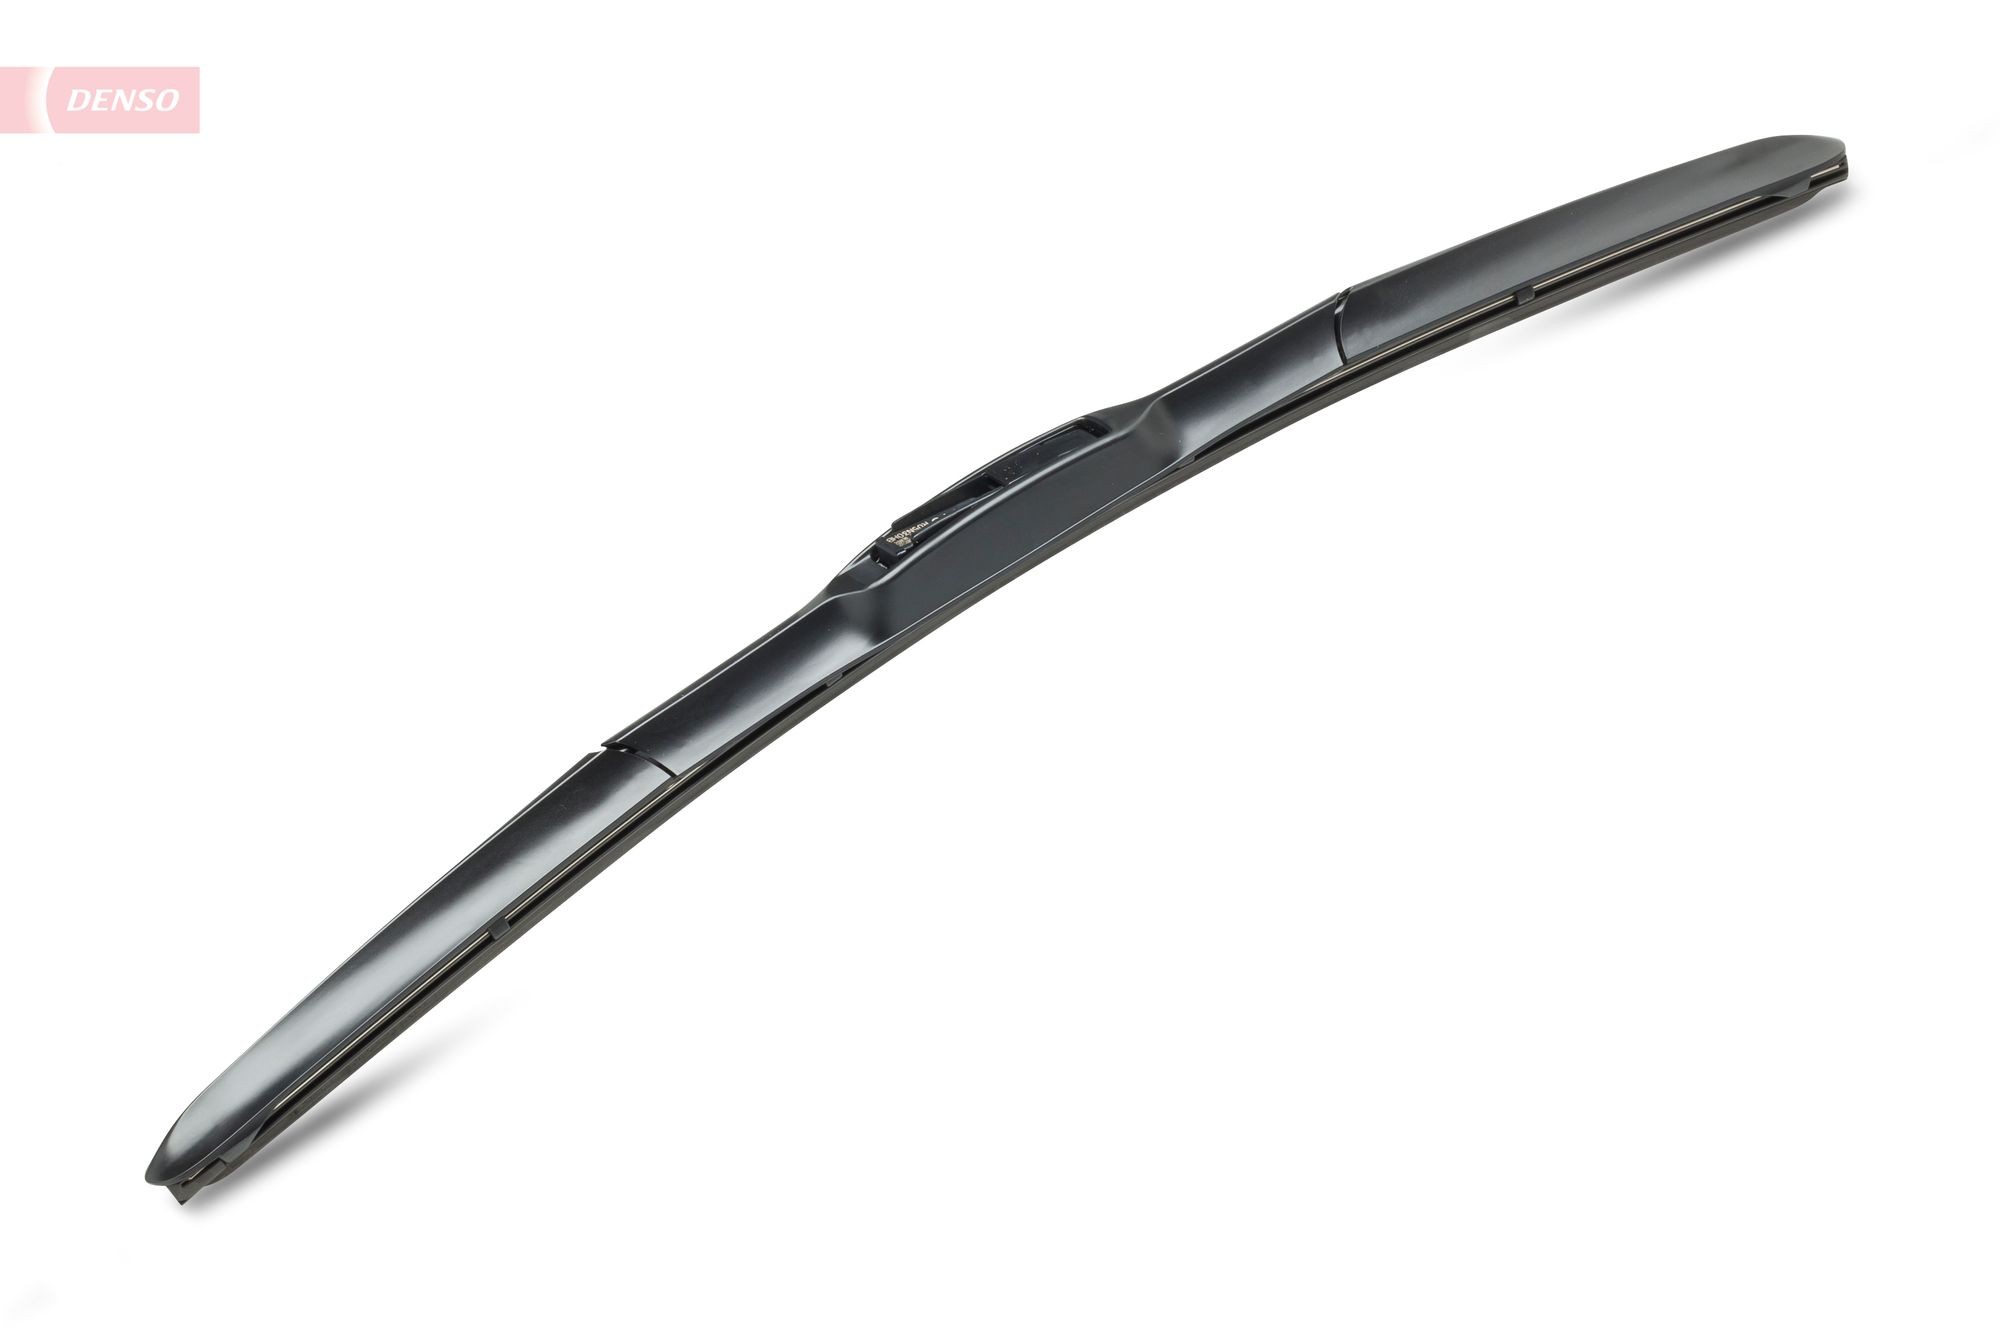 DENSO Windshield wipers DUR-048R